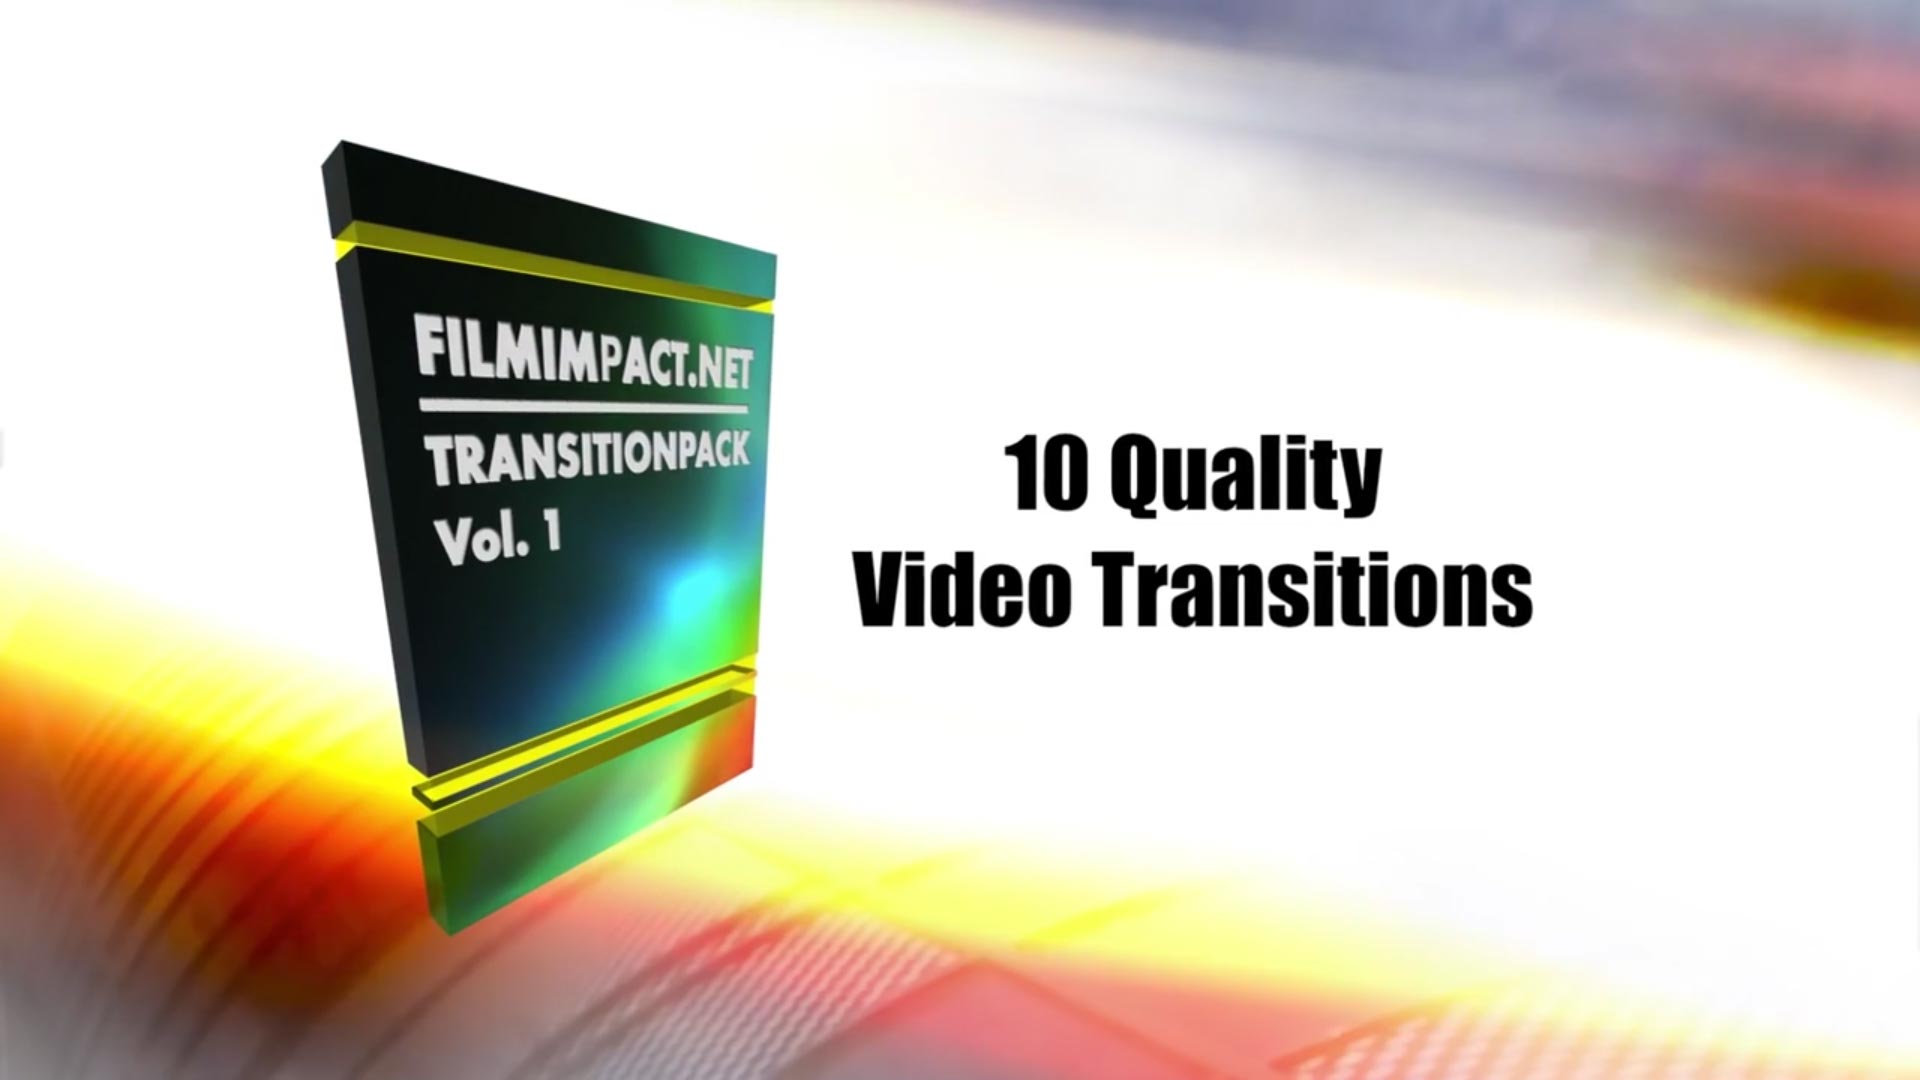 film impact transition pack 1 full download